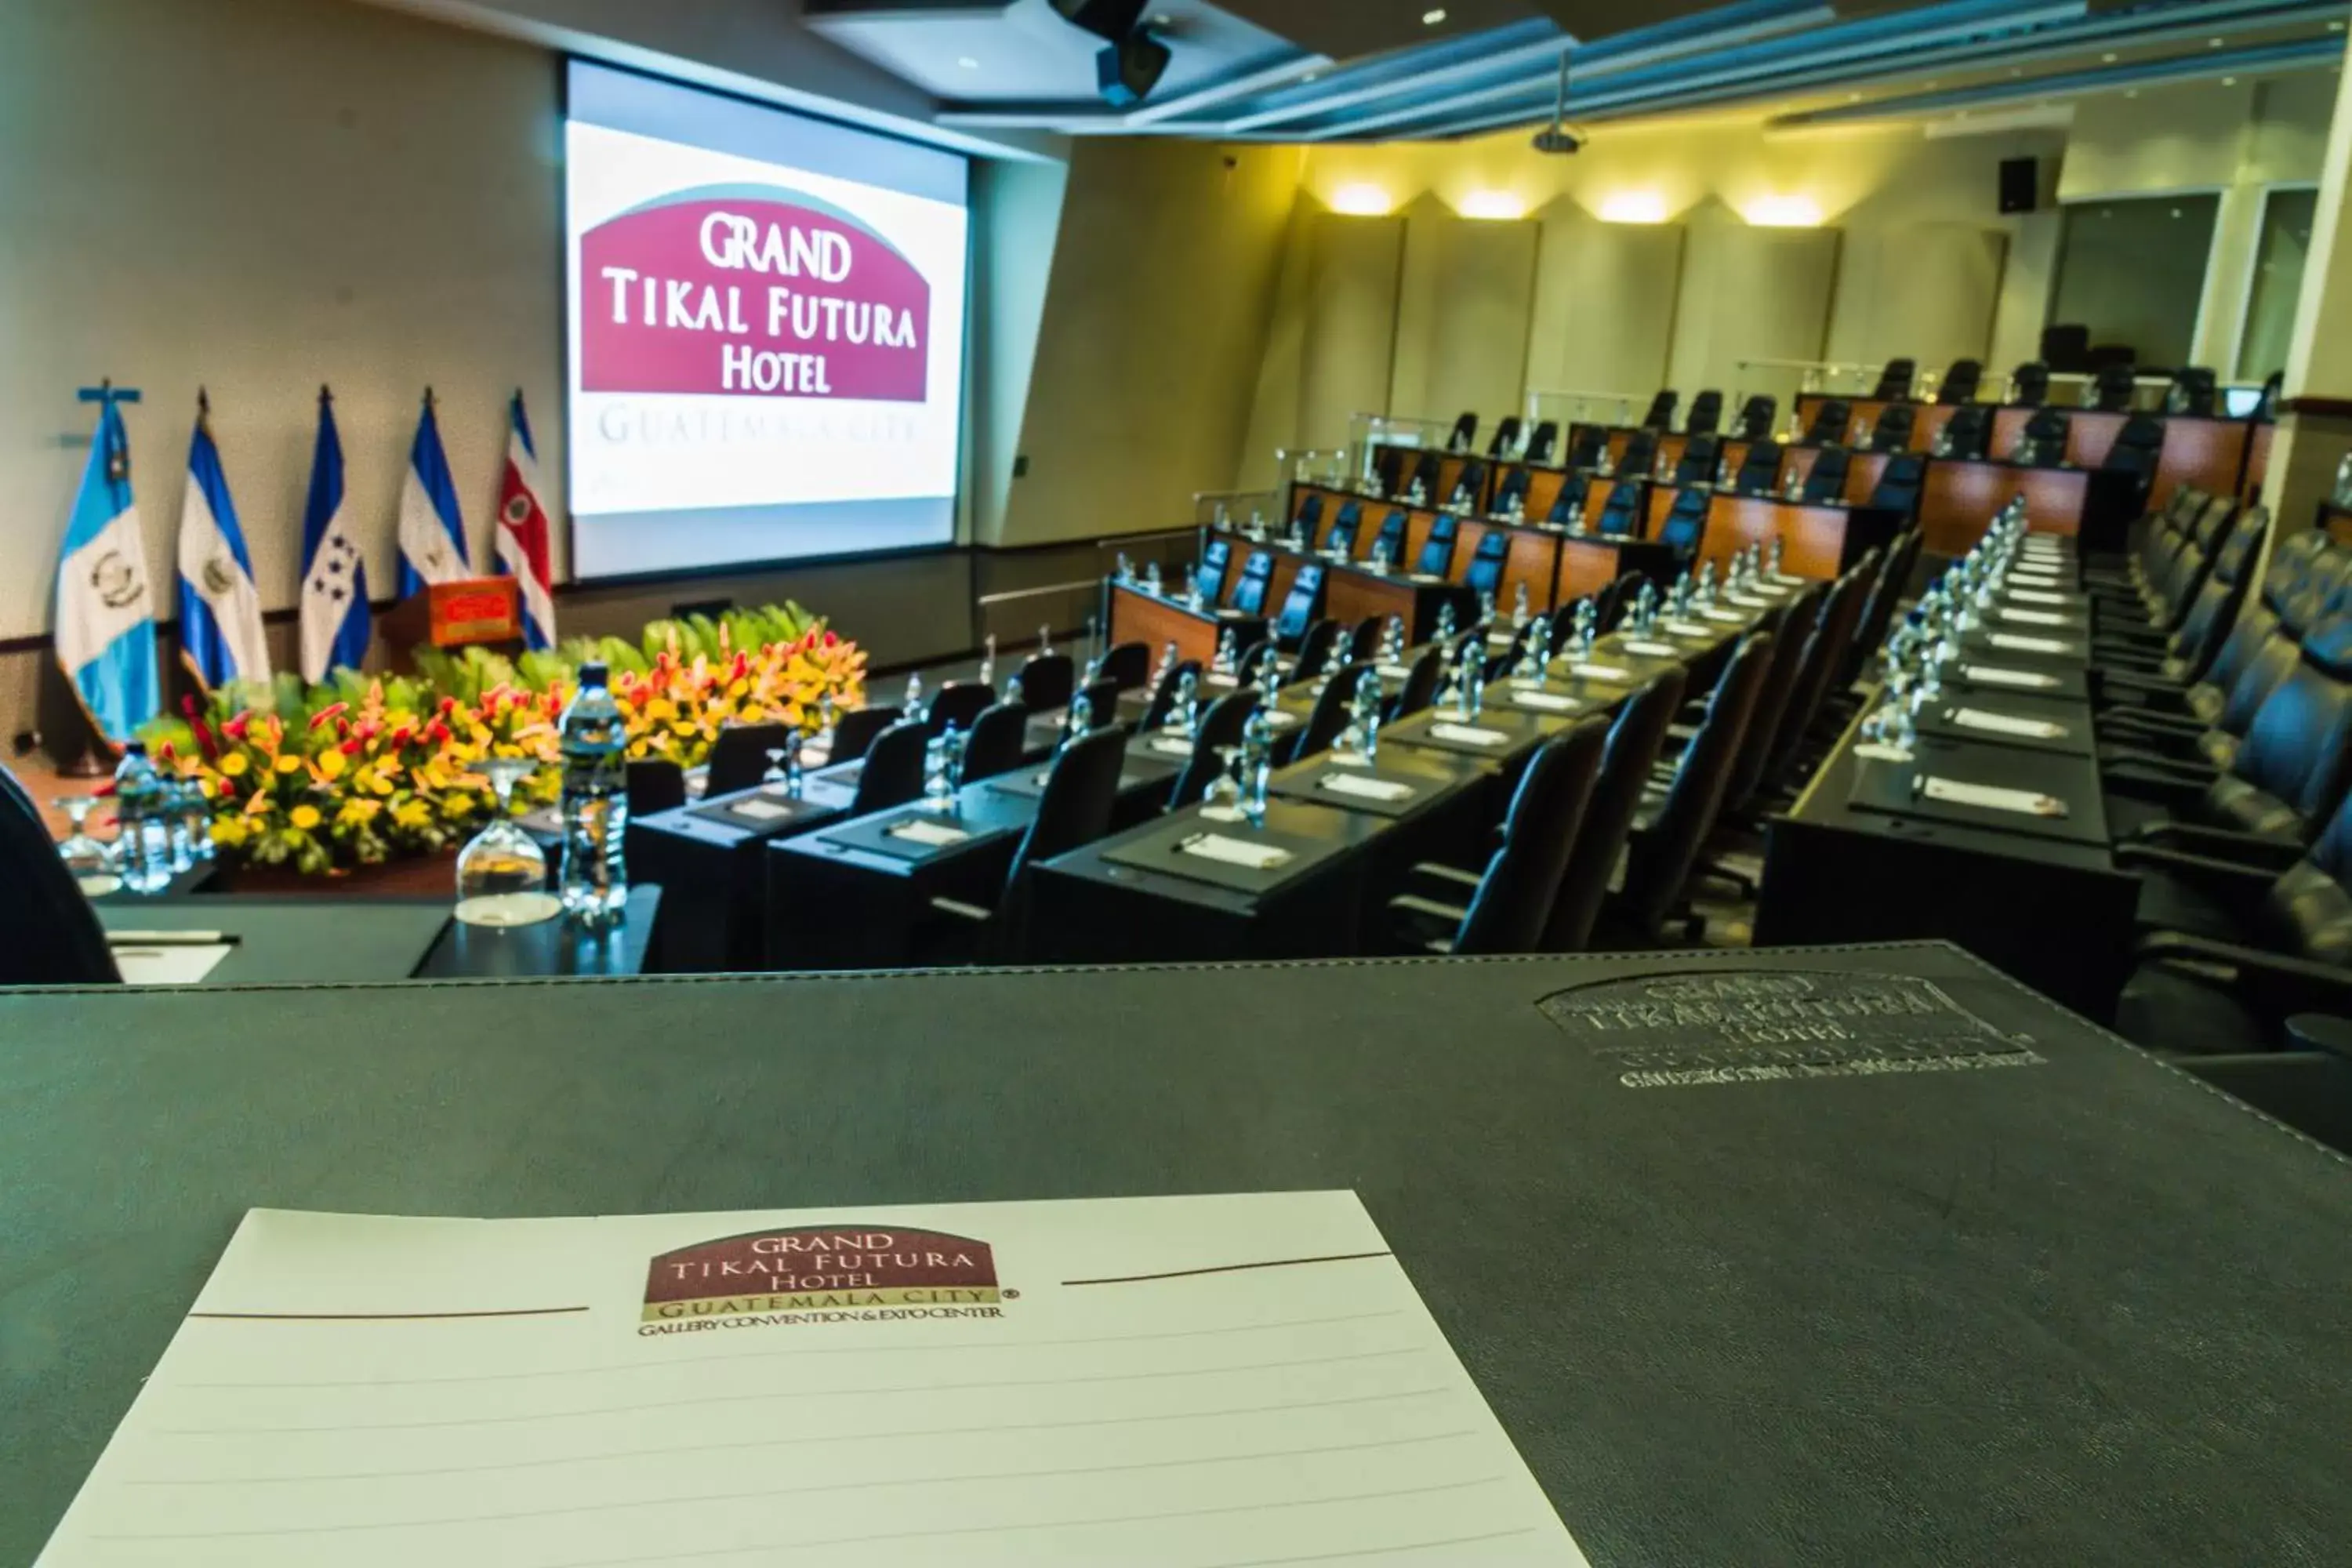 Banquet/Function facilities, Business Area/Conference Room in Grand Tikal Futura Hotel